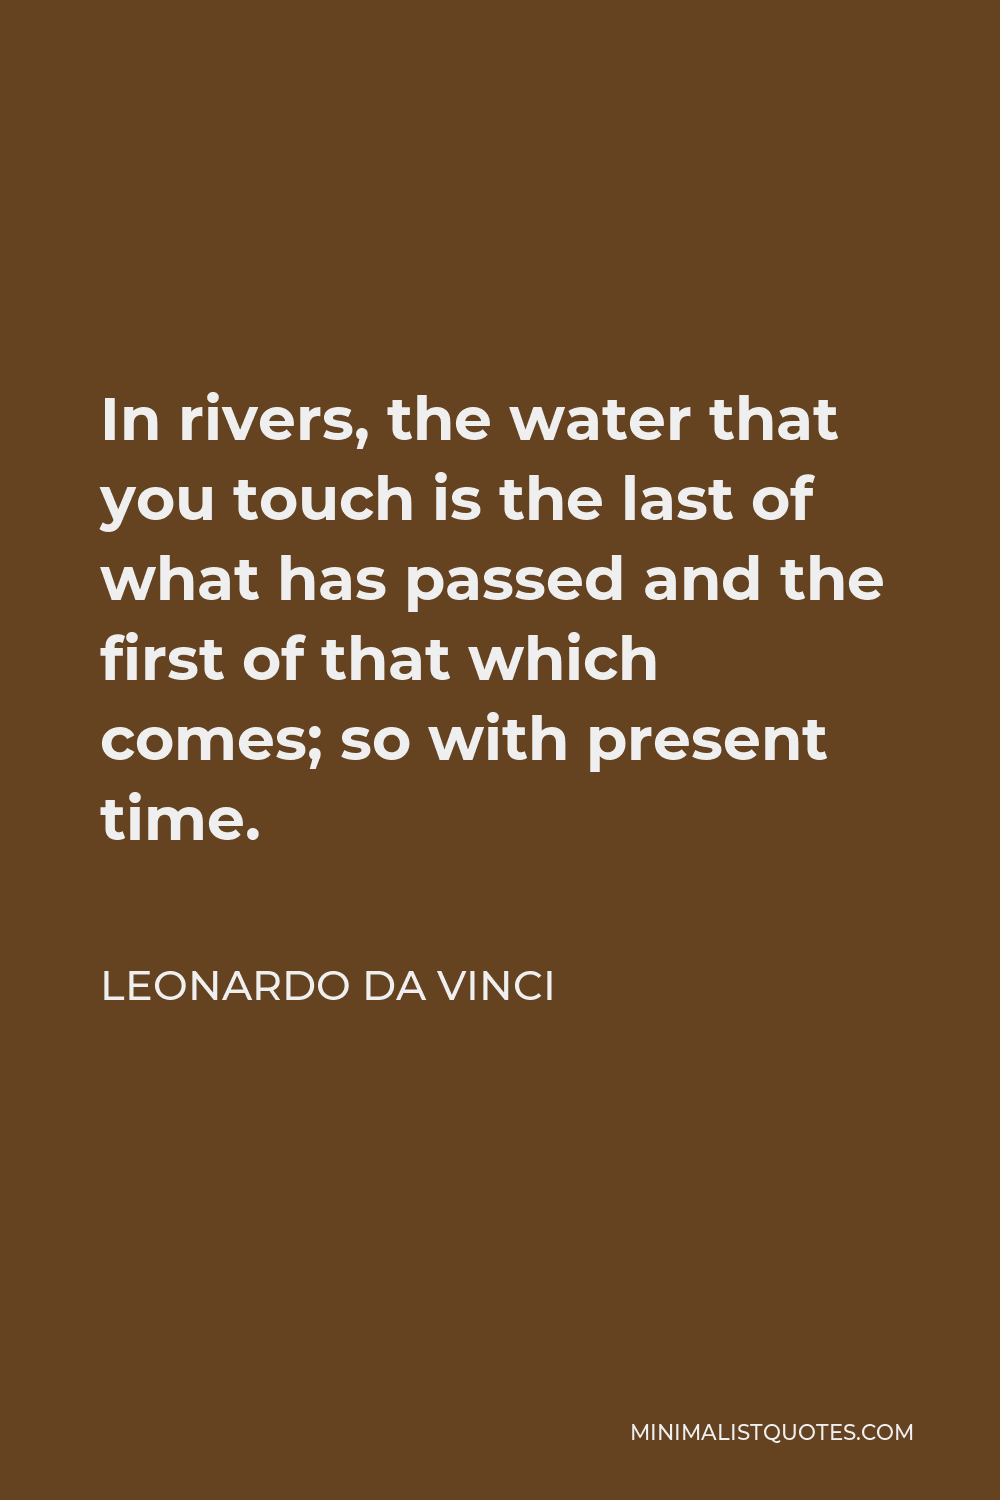 Leonardo da Vinci Quote - In rivers, the water that you touch is the last of what has passed and the first of that which comes; so with present time.